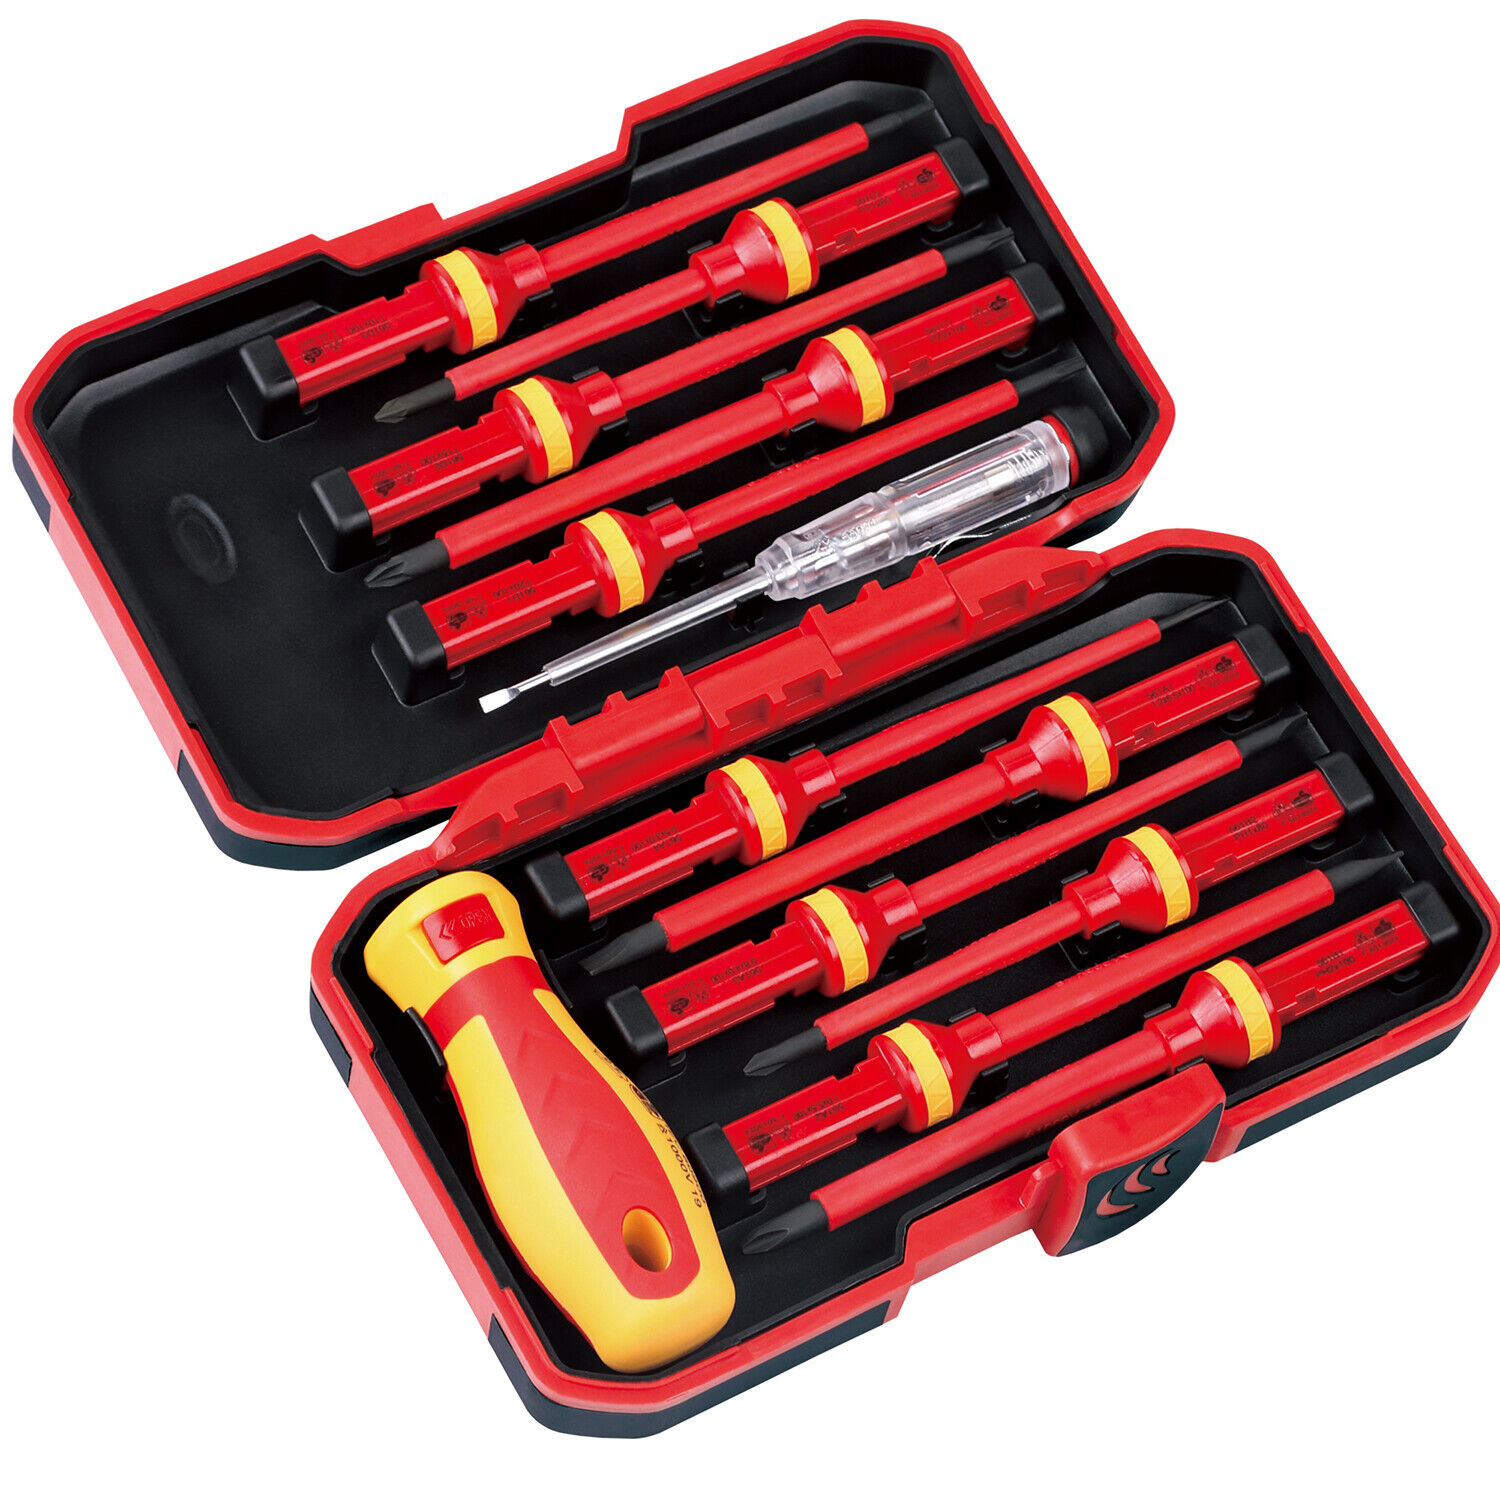 13PC 1000V Magnetic Insulated Electrician Screwdriver Set VDE-GS DIY Tool Kit